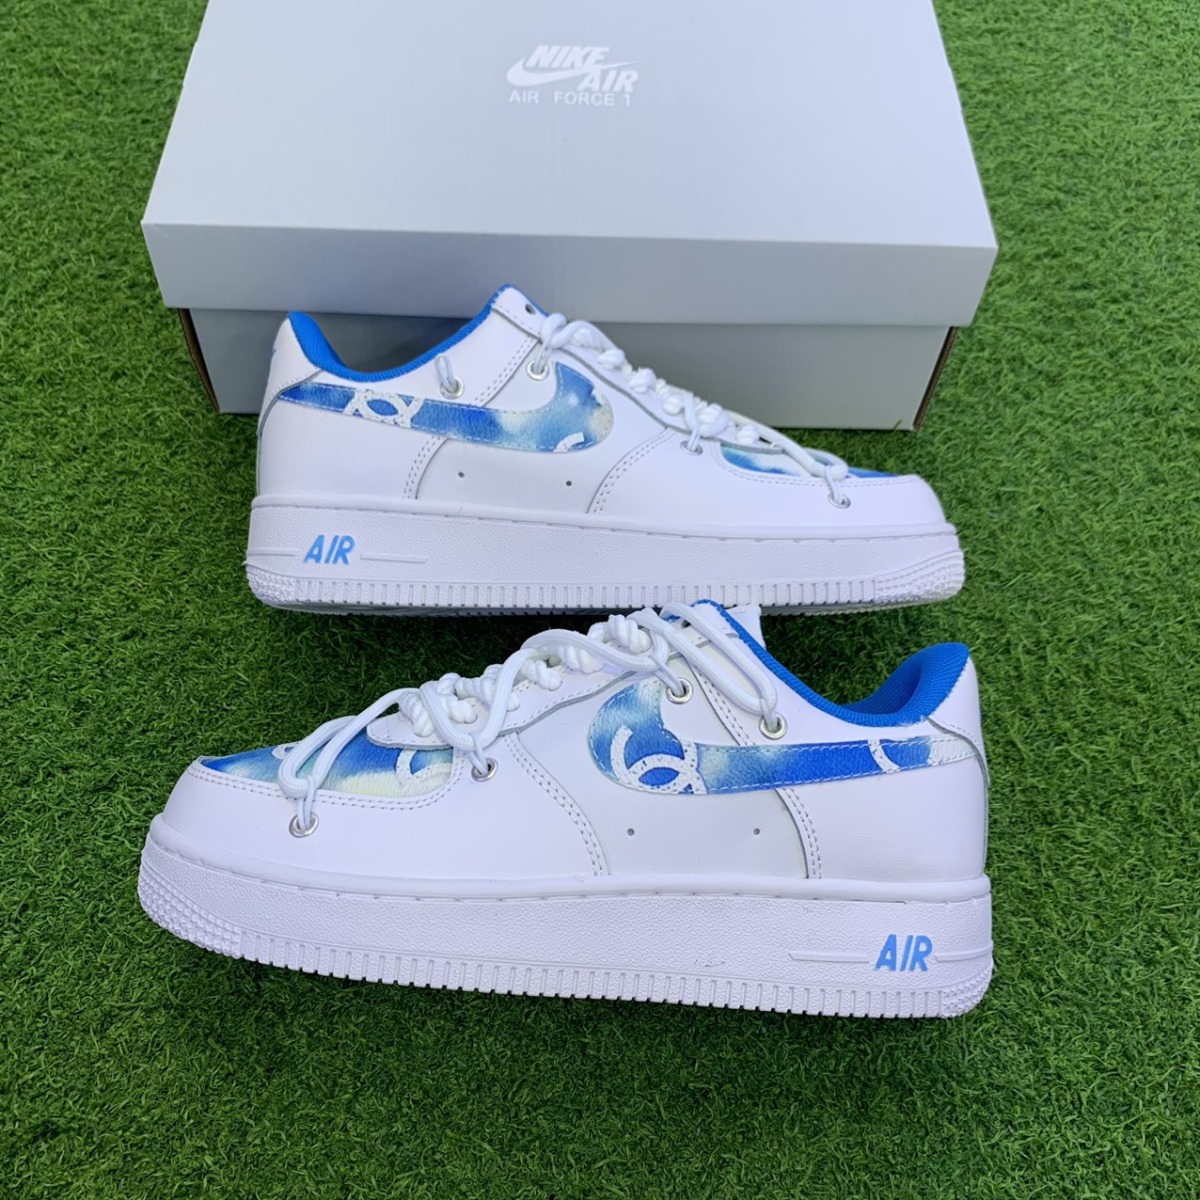 giay nike air force 1 chanel chat 2023 likeauth 2